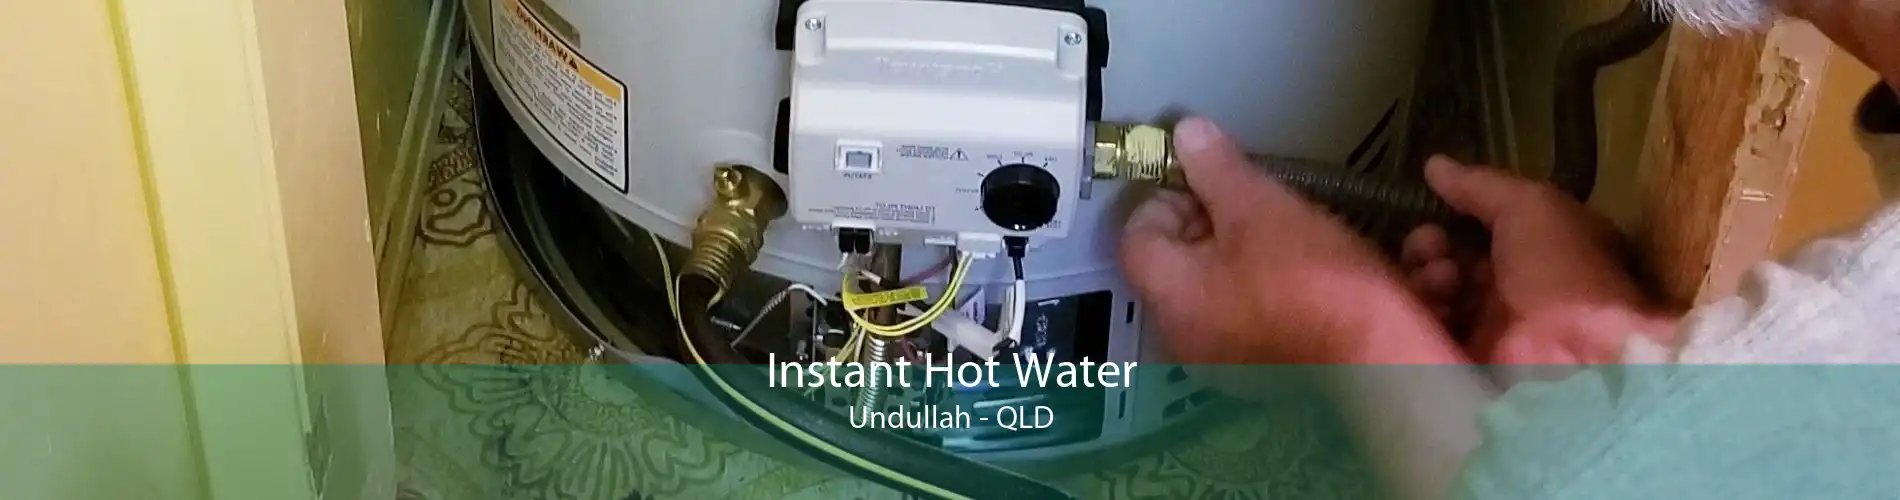 Instant Hot Water Undullah - QLD